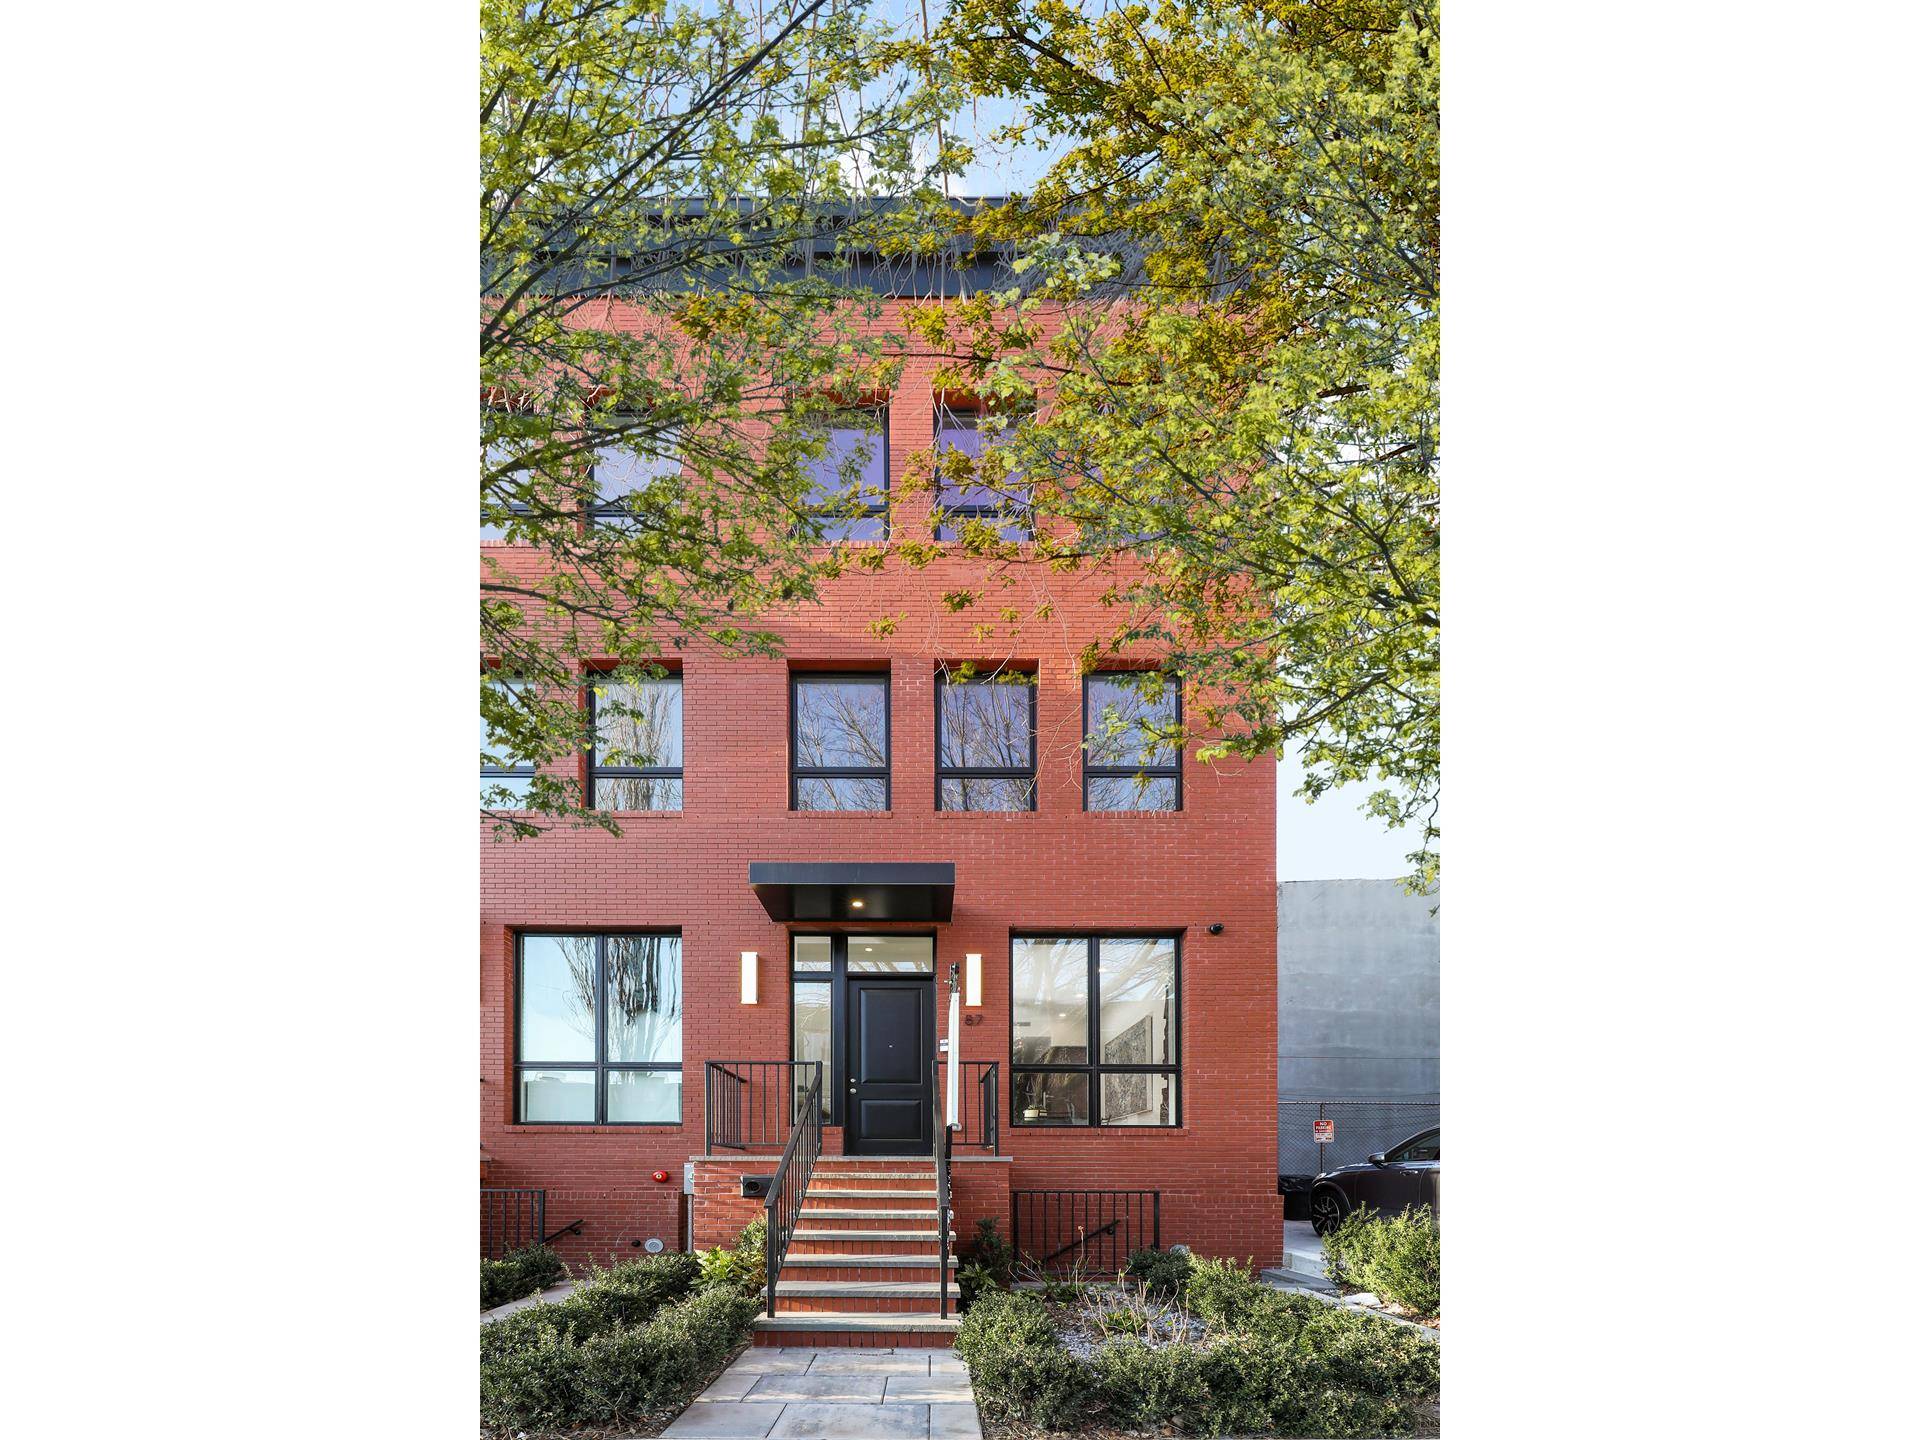 Nestled in the heart of Greenpoint sits 87 Calyer Street, a 4, 420 square foot, turn key, single family townhouse with five private outdoor spaces.